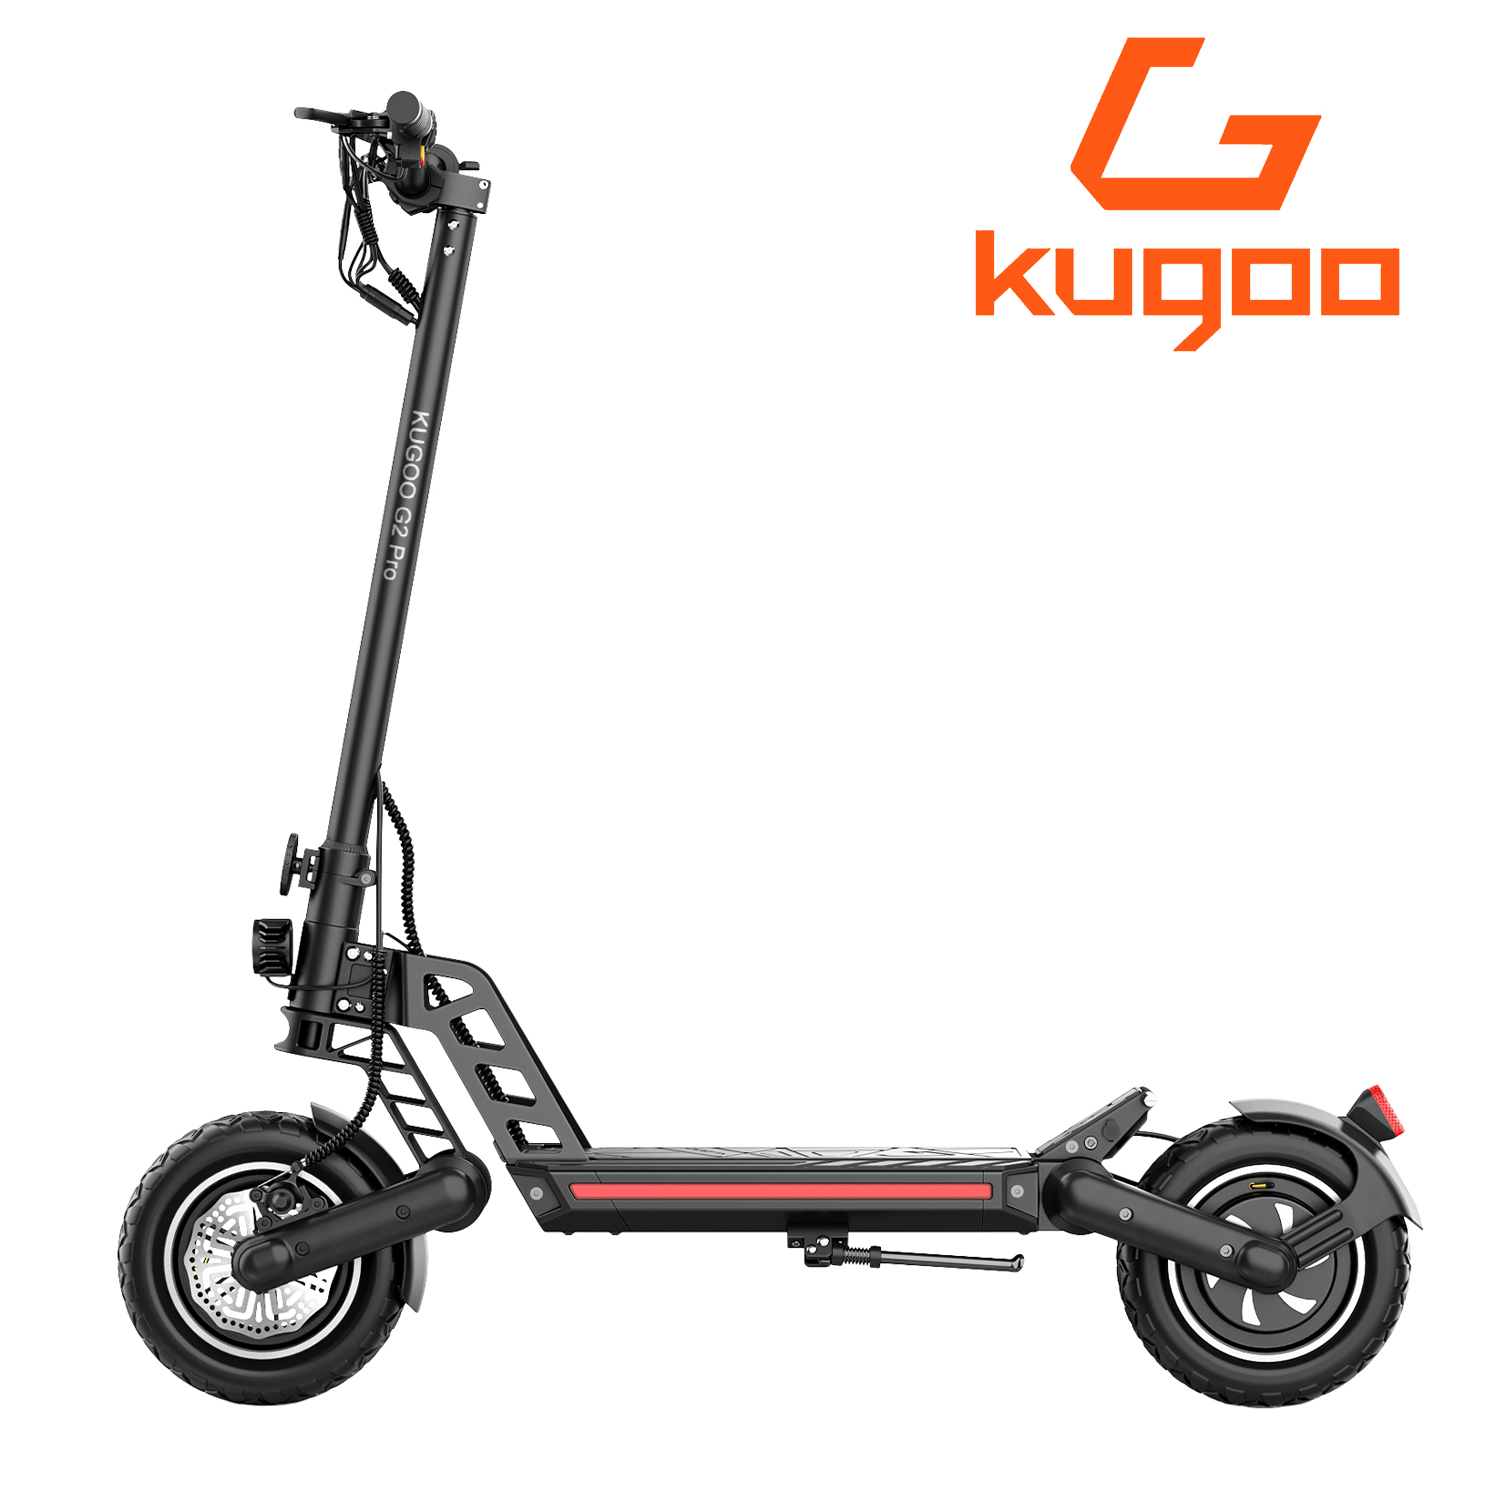 Buy KUKIRIN G2 Max Foldable Electric Scooter with 1,000W Motor